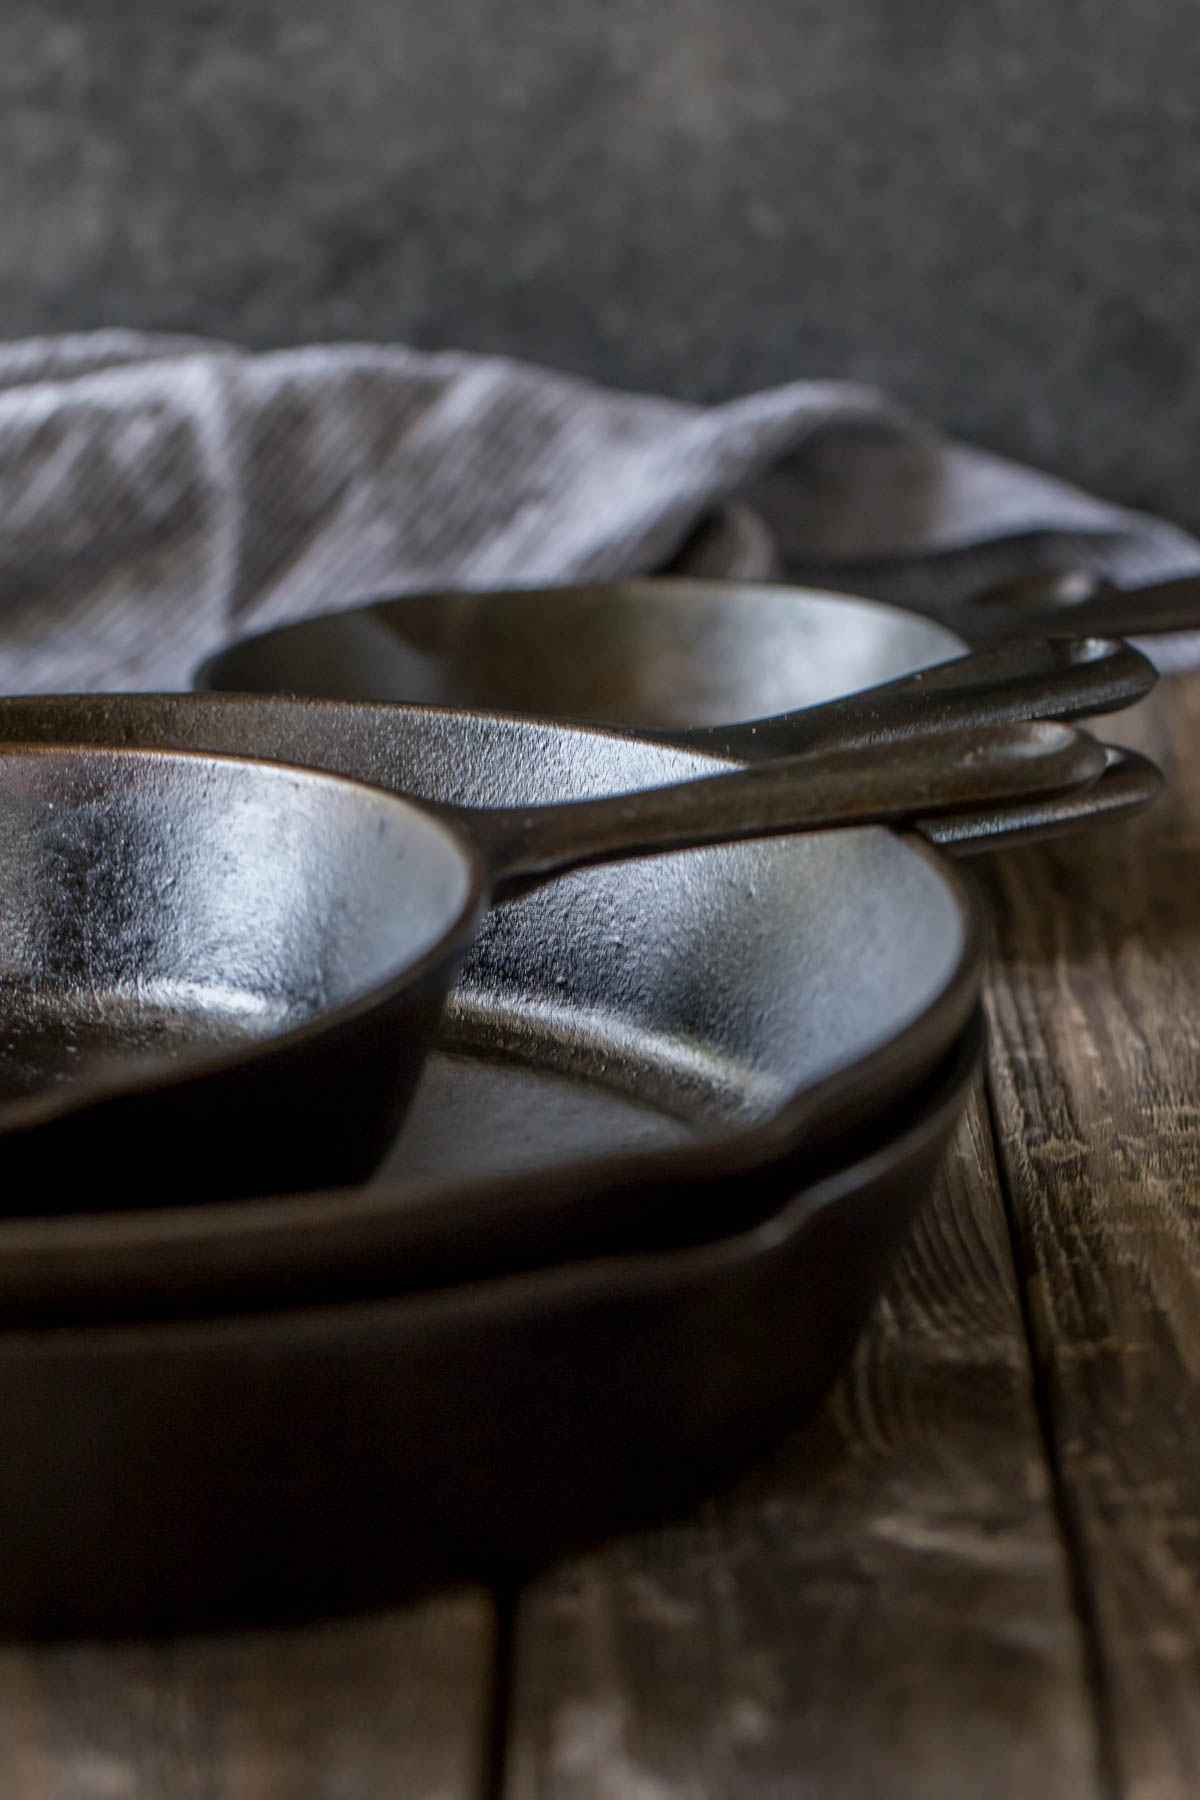 Five cast iron skillets stacked on a wooden board, with a dish cloth in background.